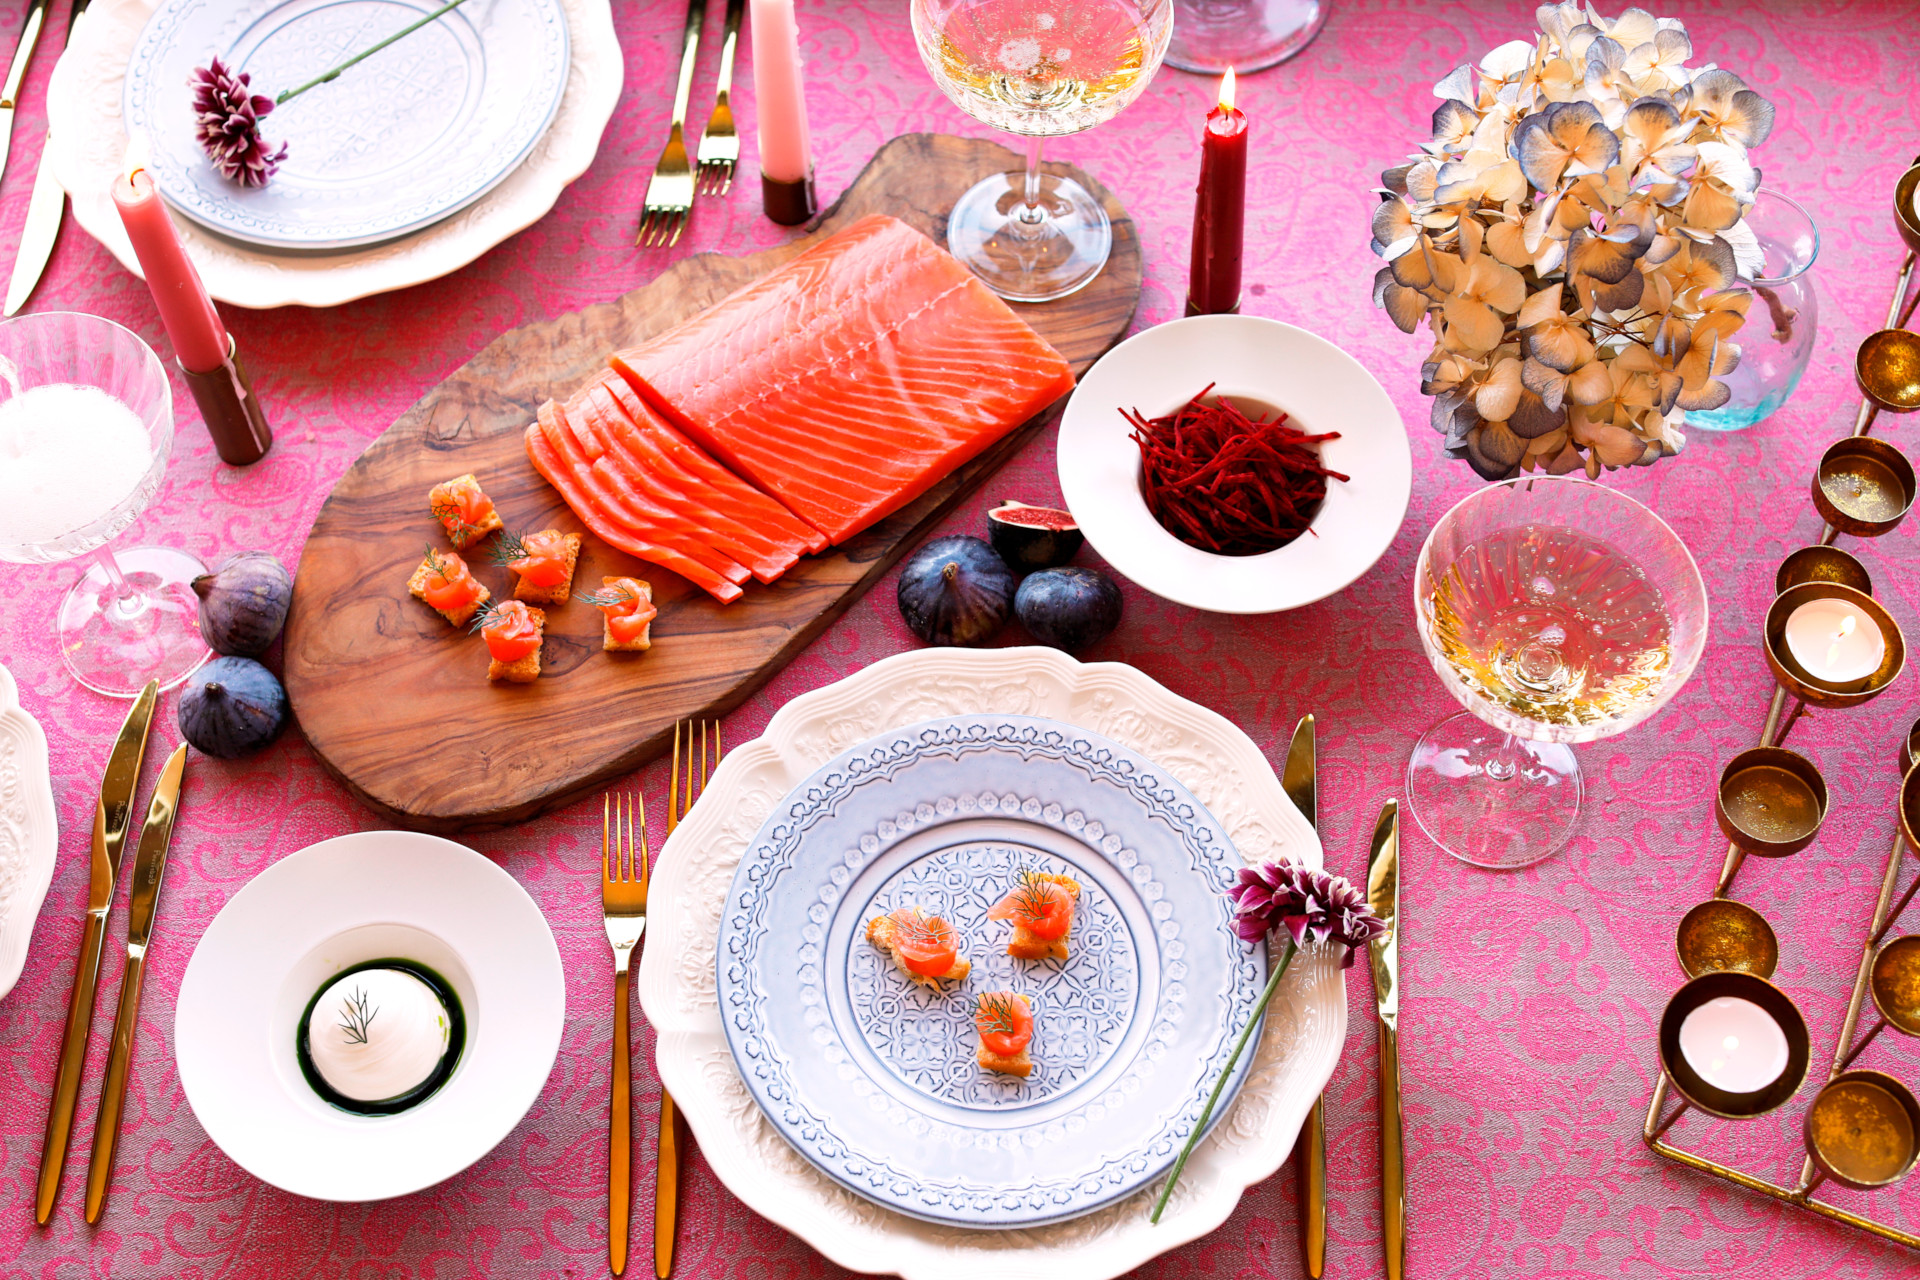 Spread of salmon canapes on pink surface